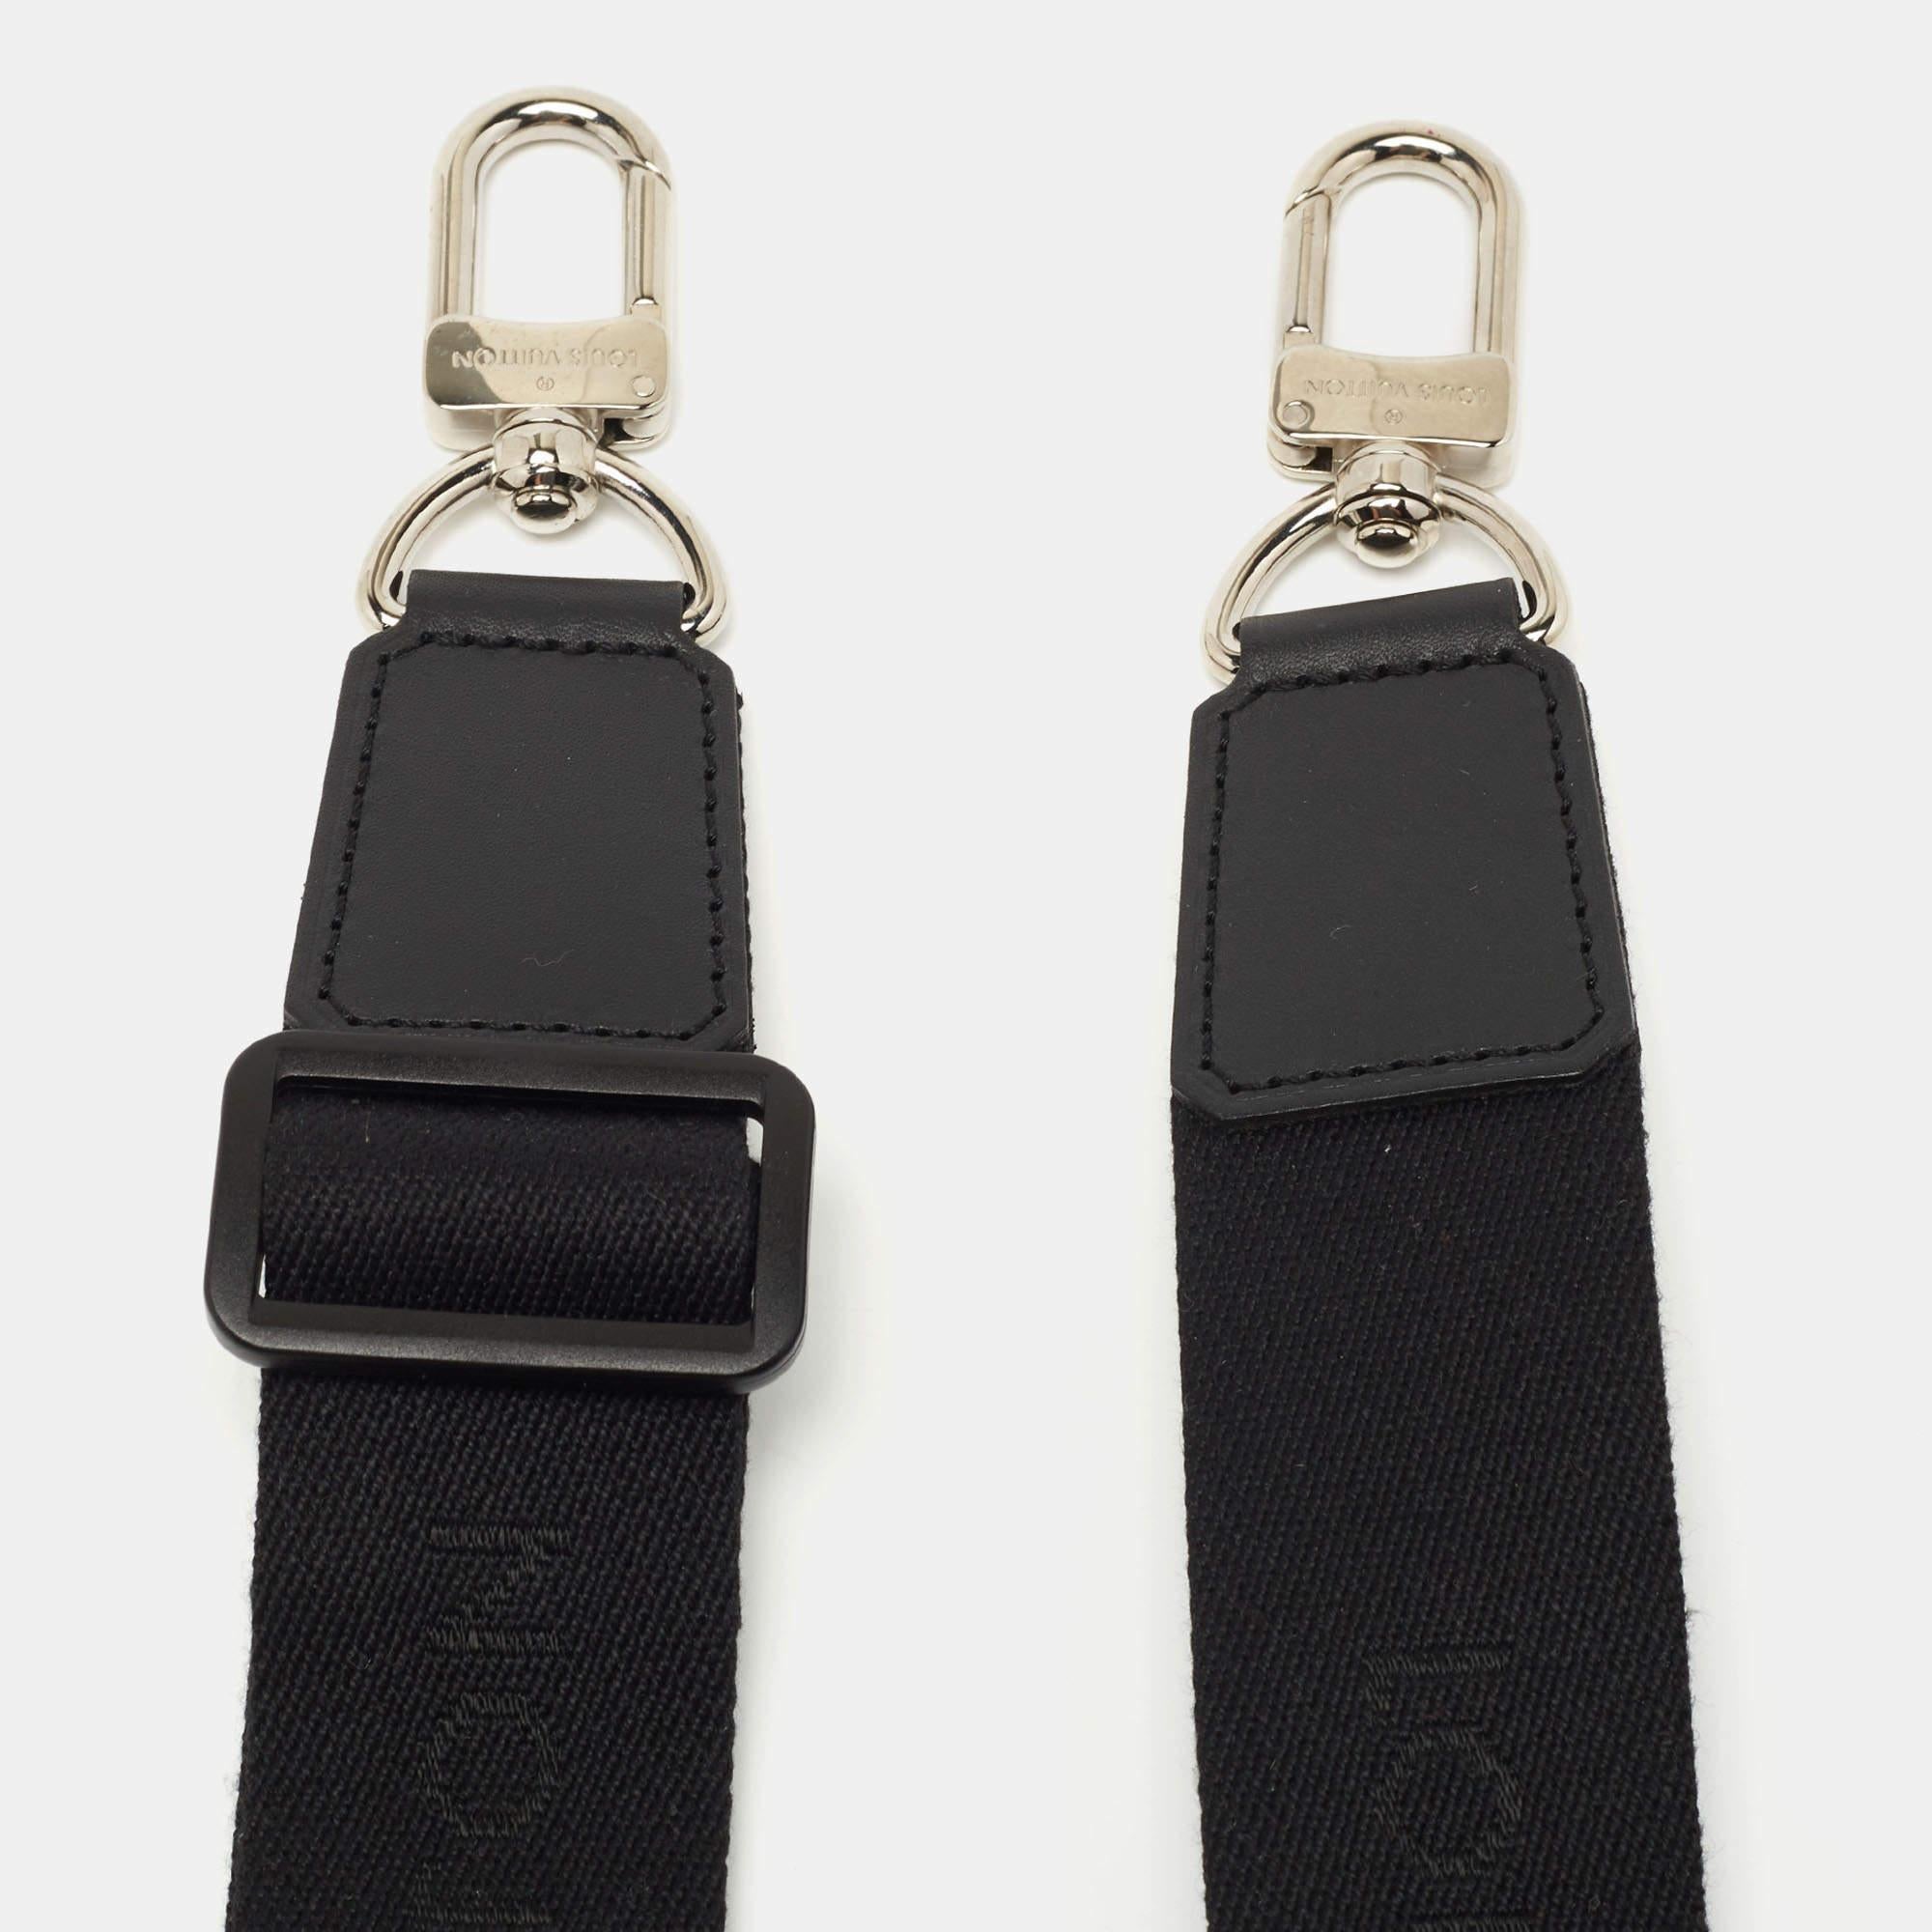 Extending its flawless craftsmanship to accessories, Louis Vuitton brings you this simple and functional shoulder strap. This LV strap is equipped with clasps, so you can easily attach it to your bags.

